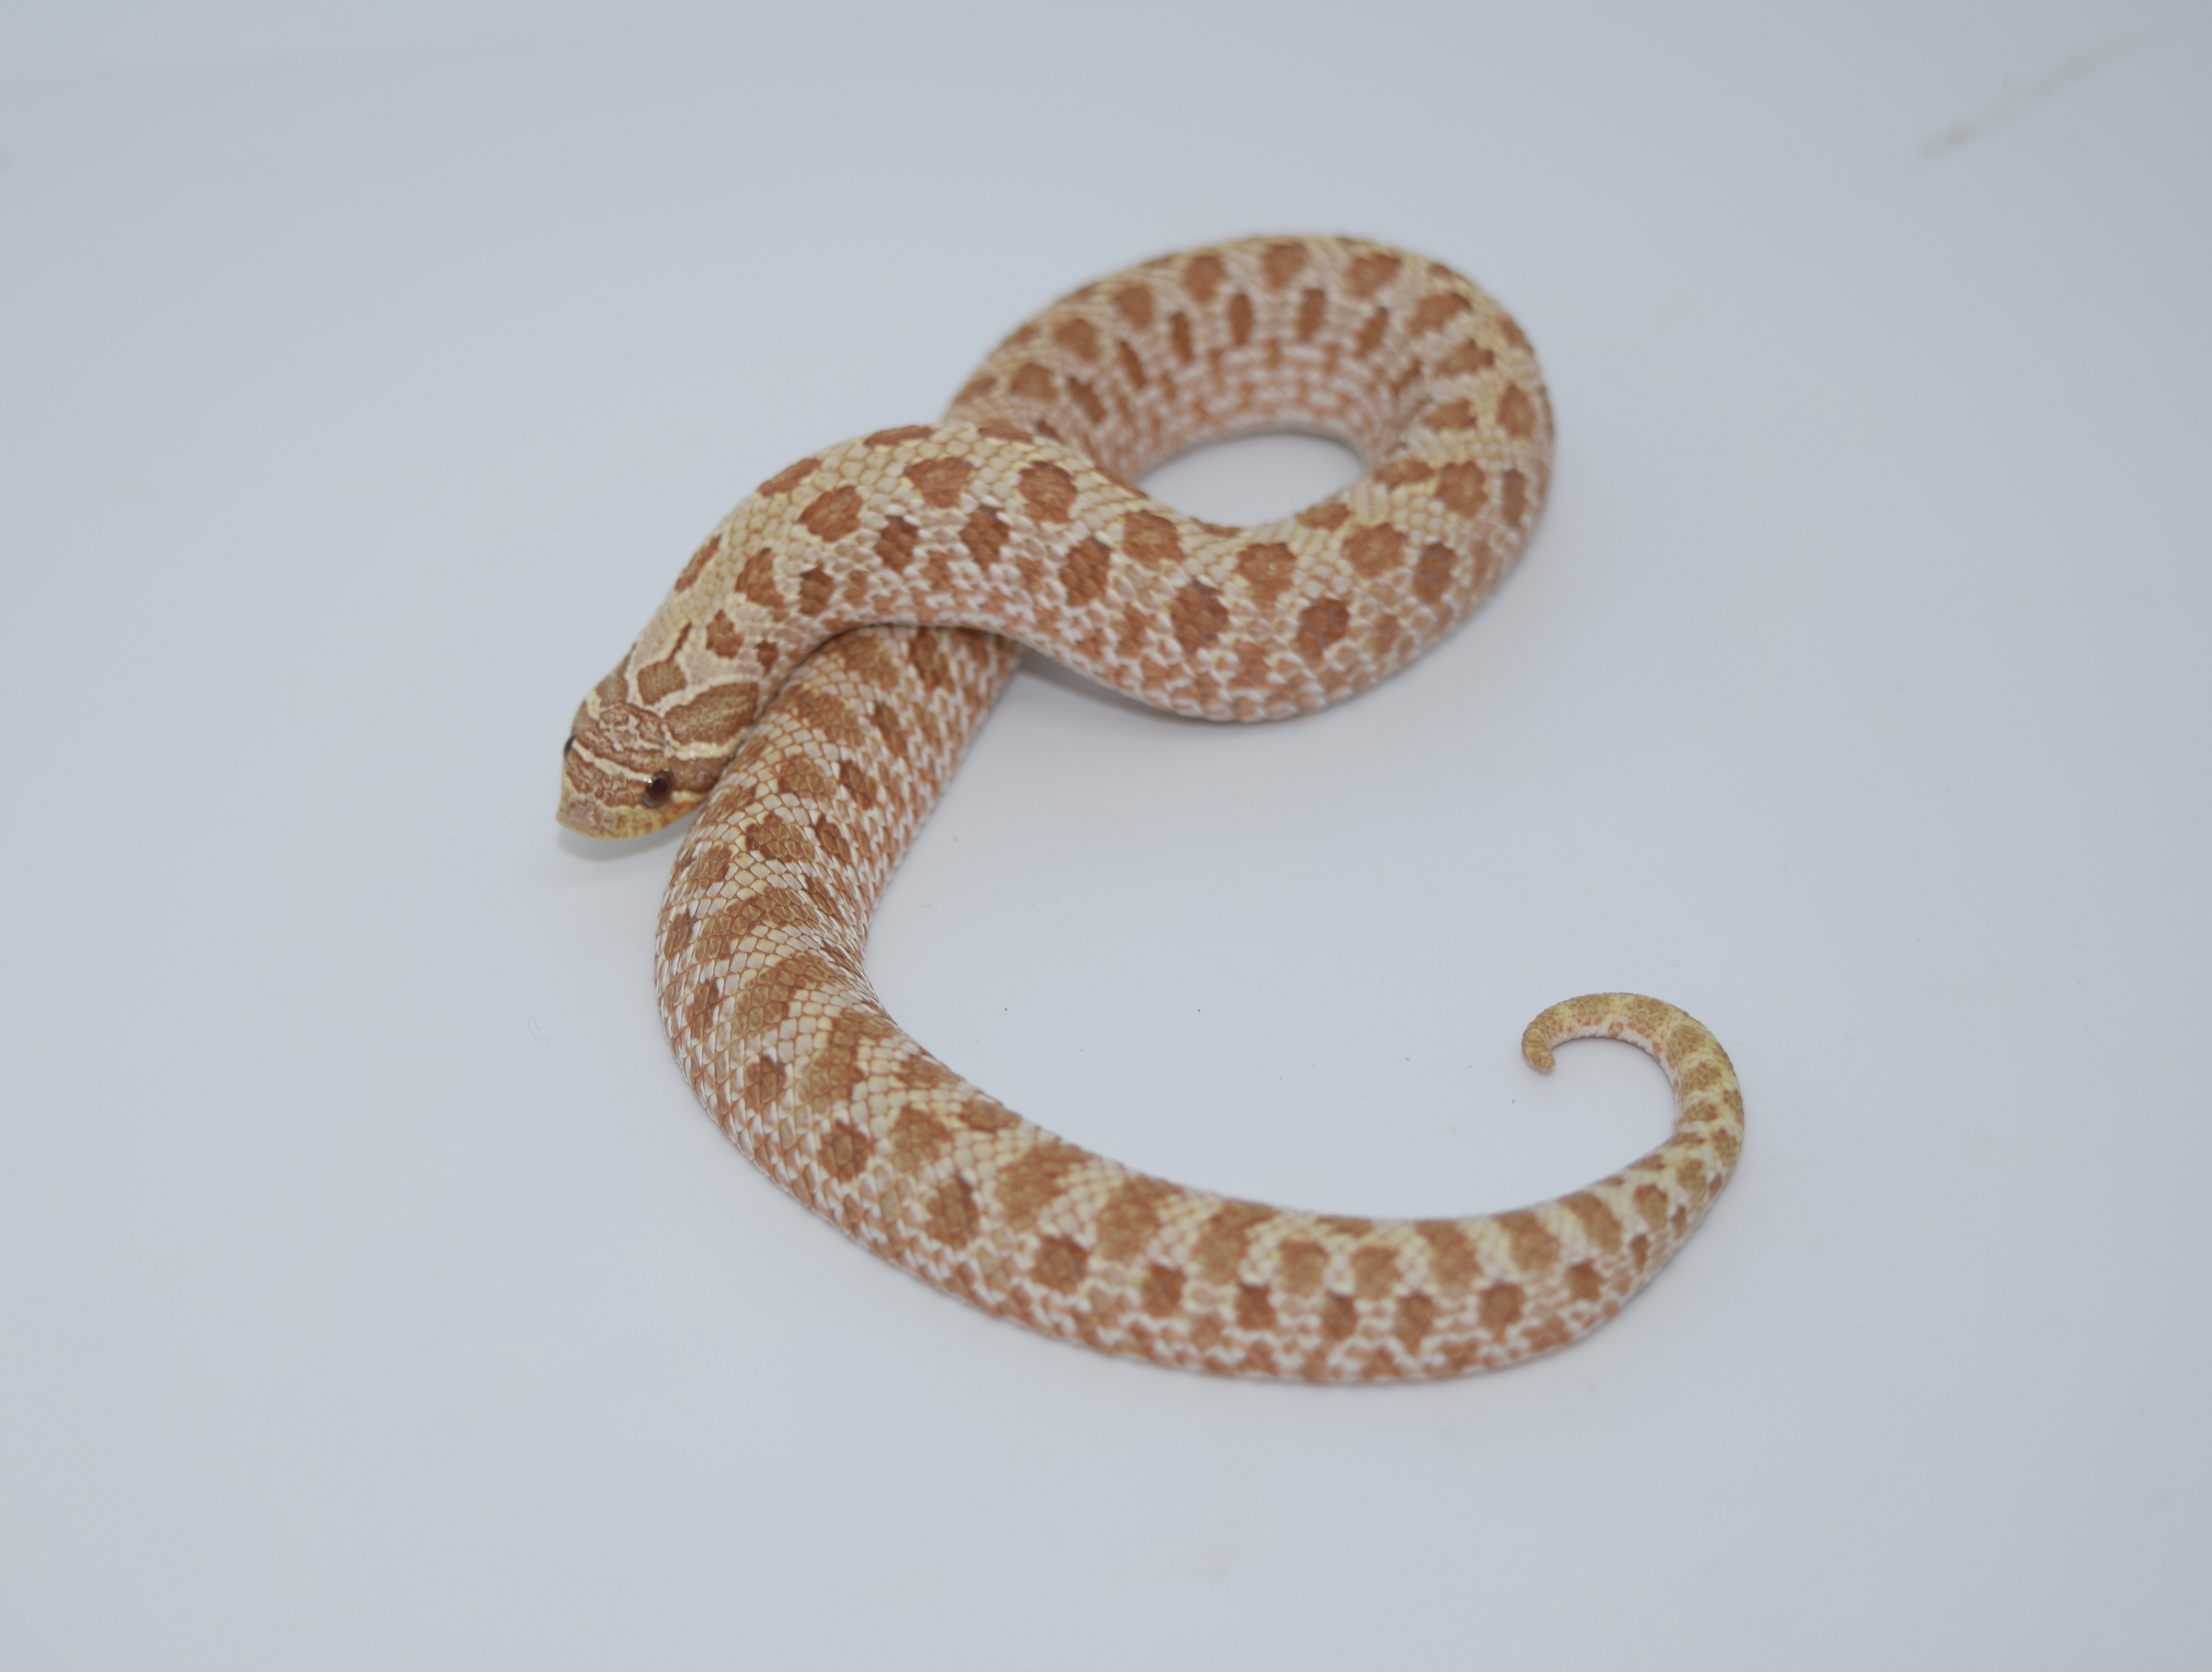 Evans Hypo Western Hognose by BMT Reptiles & Exotics